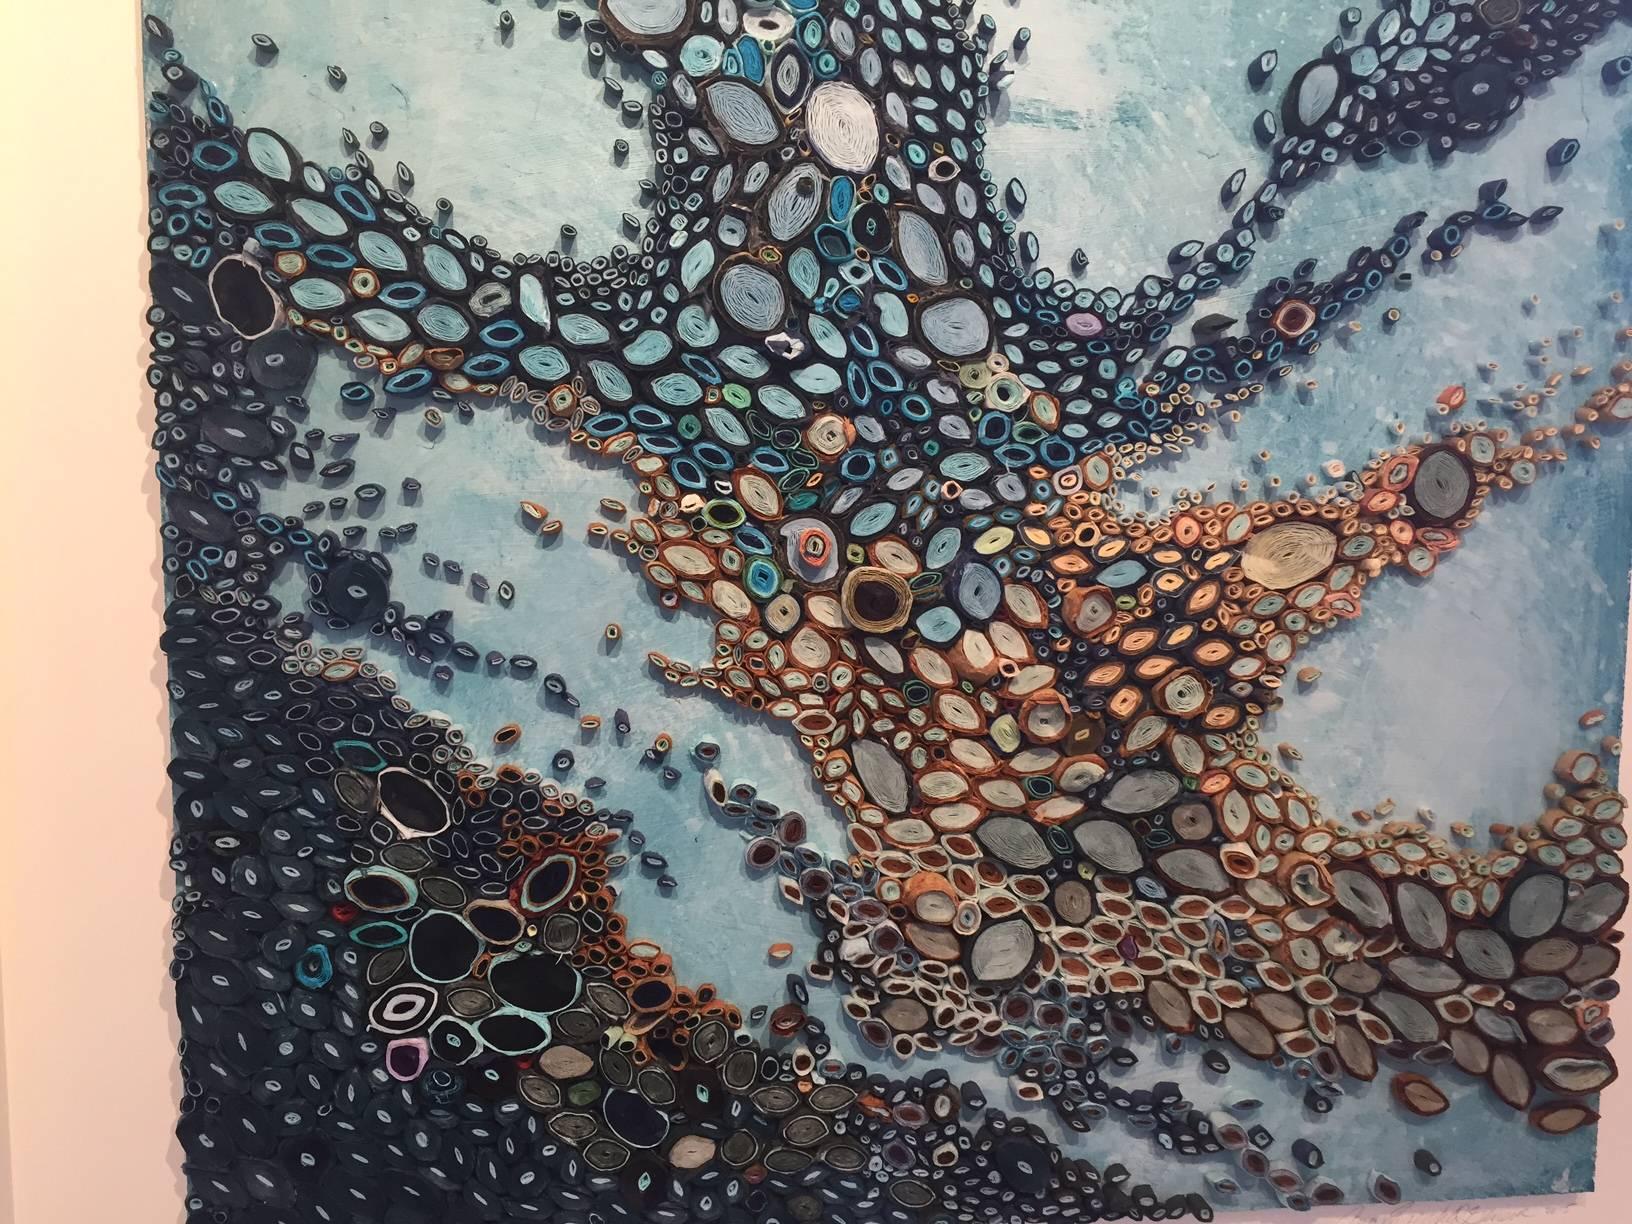 This blue mixed media piece is by Amy Genser who makes dimensional paper collages. These colorful, textural, one-of-a-kind wall pieces embody movement and processes. She masterfully manipulates paper -- each piece being cut, rolled and stacked -- to